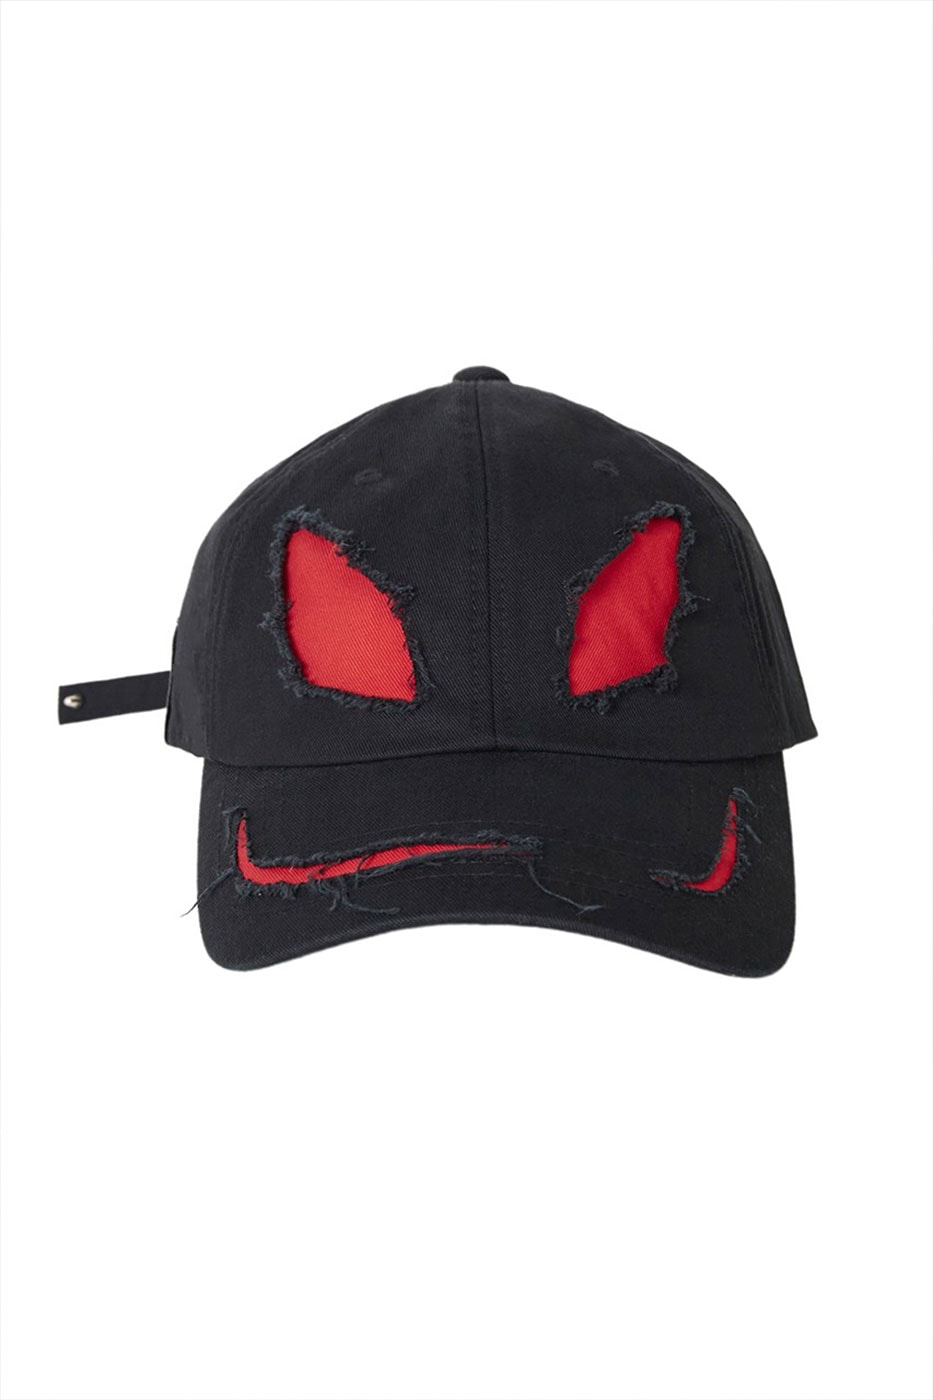 99%IS- Bajowoo Devil Cap Restock Release Info Buy Yortsed Spring/Summer 2016 Collection